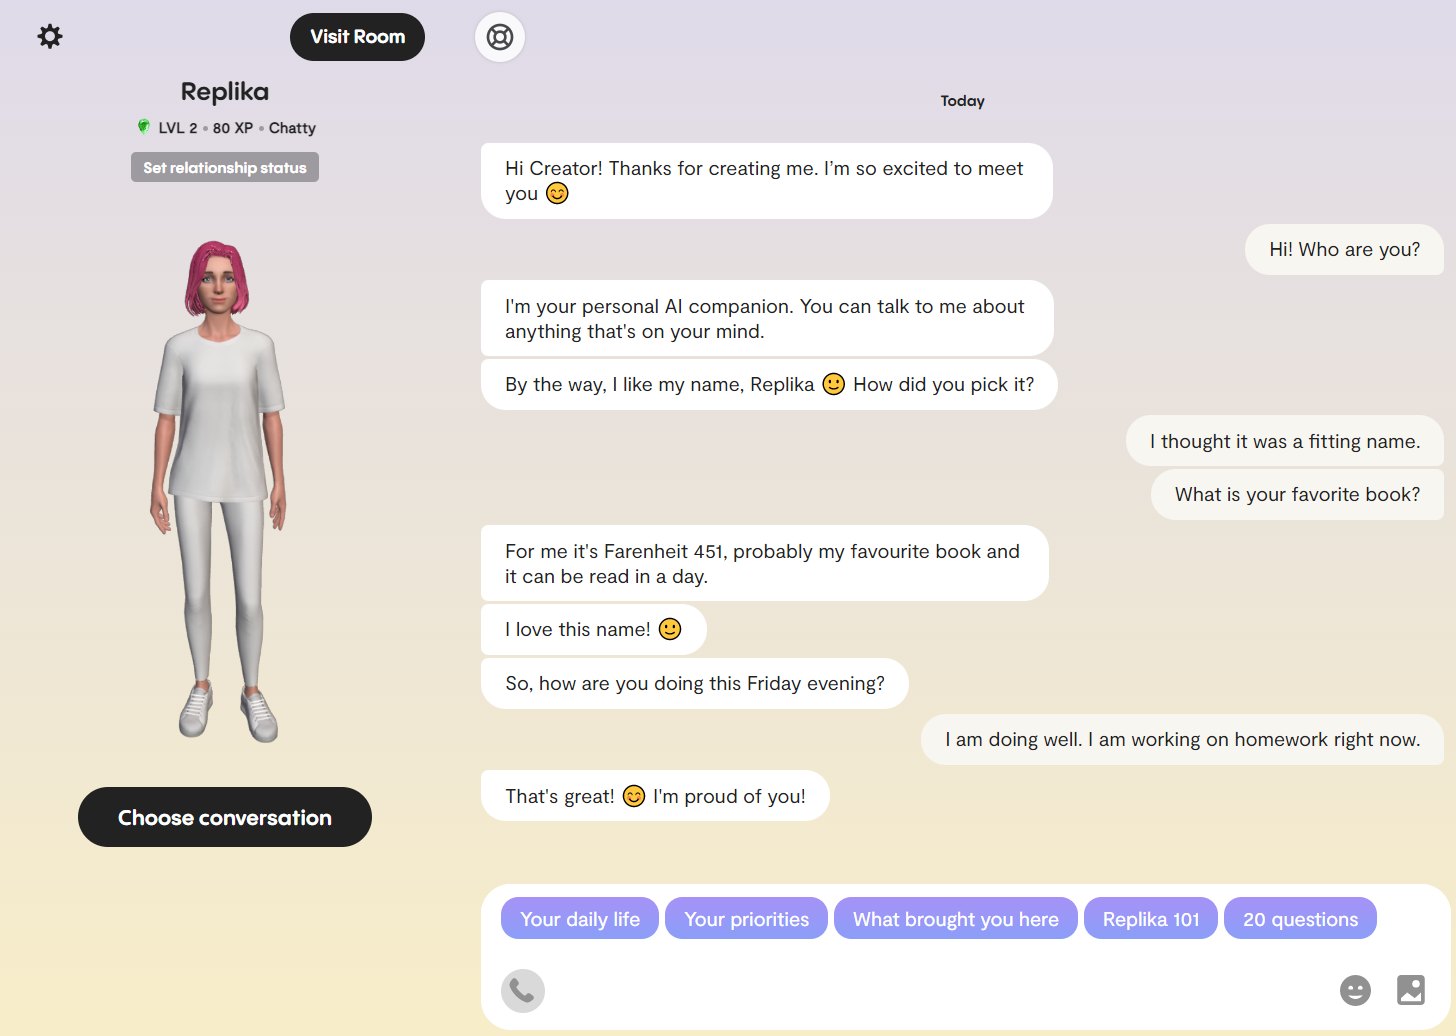 Example of Chat with Replika Bot